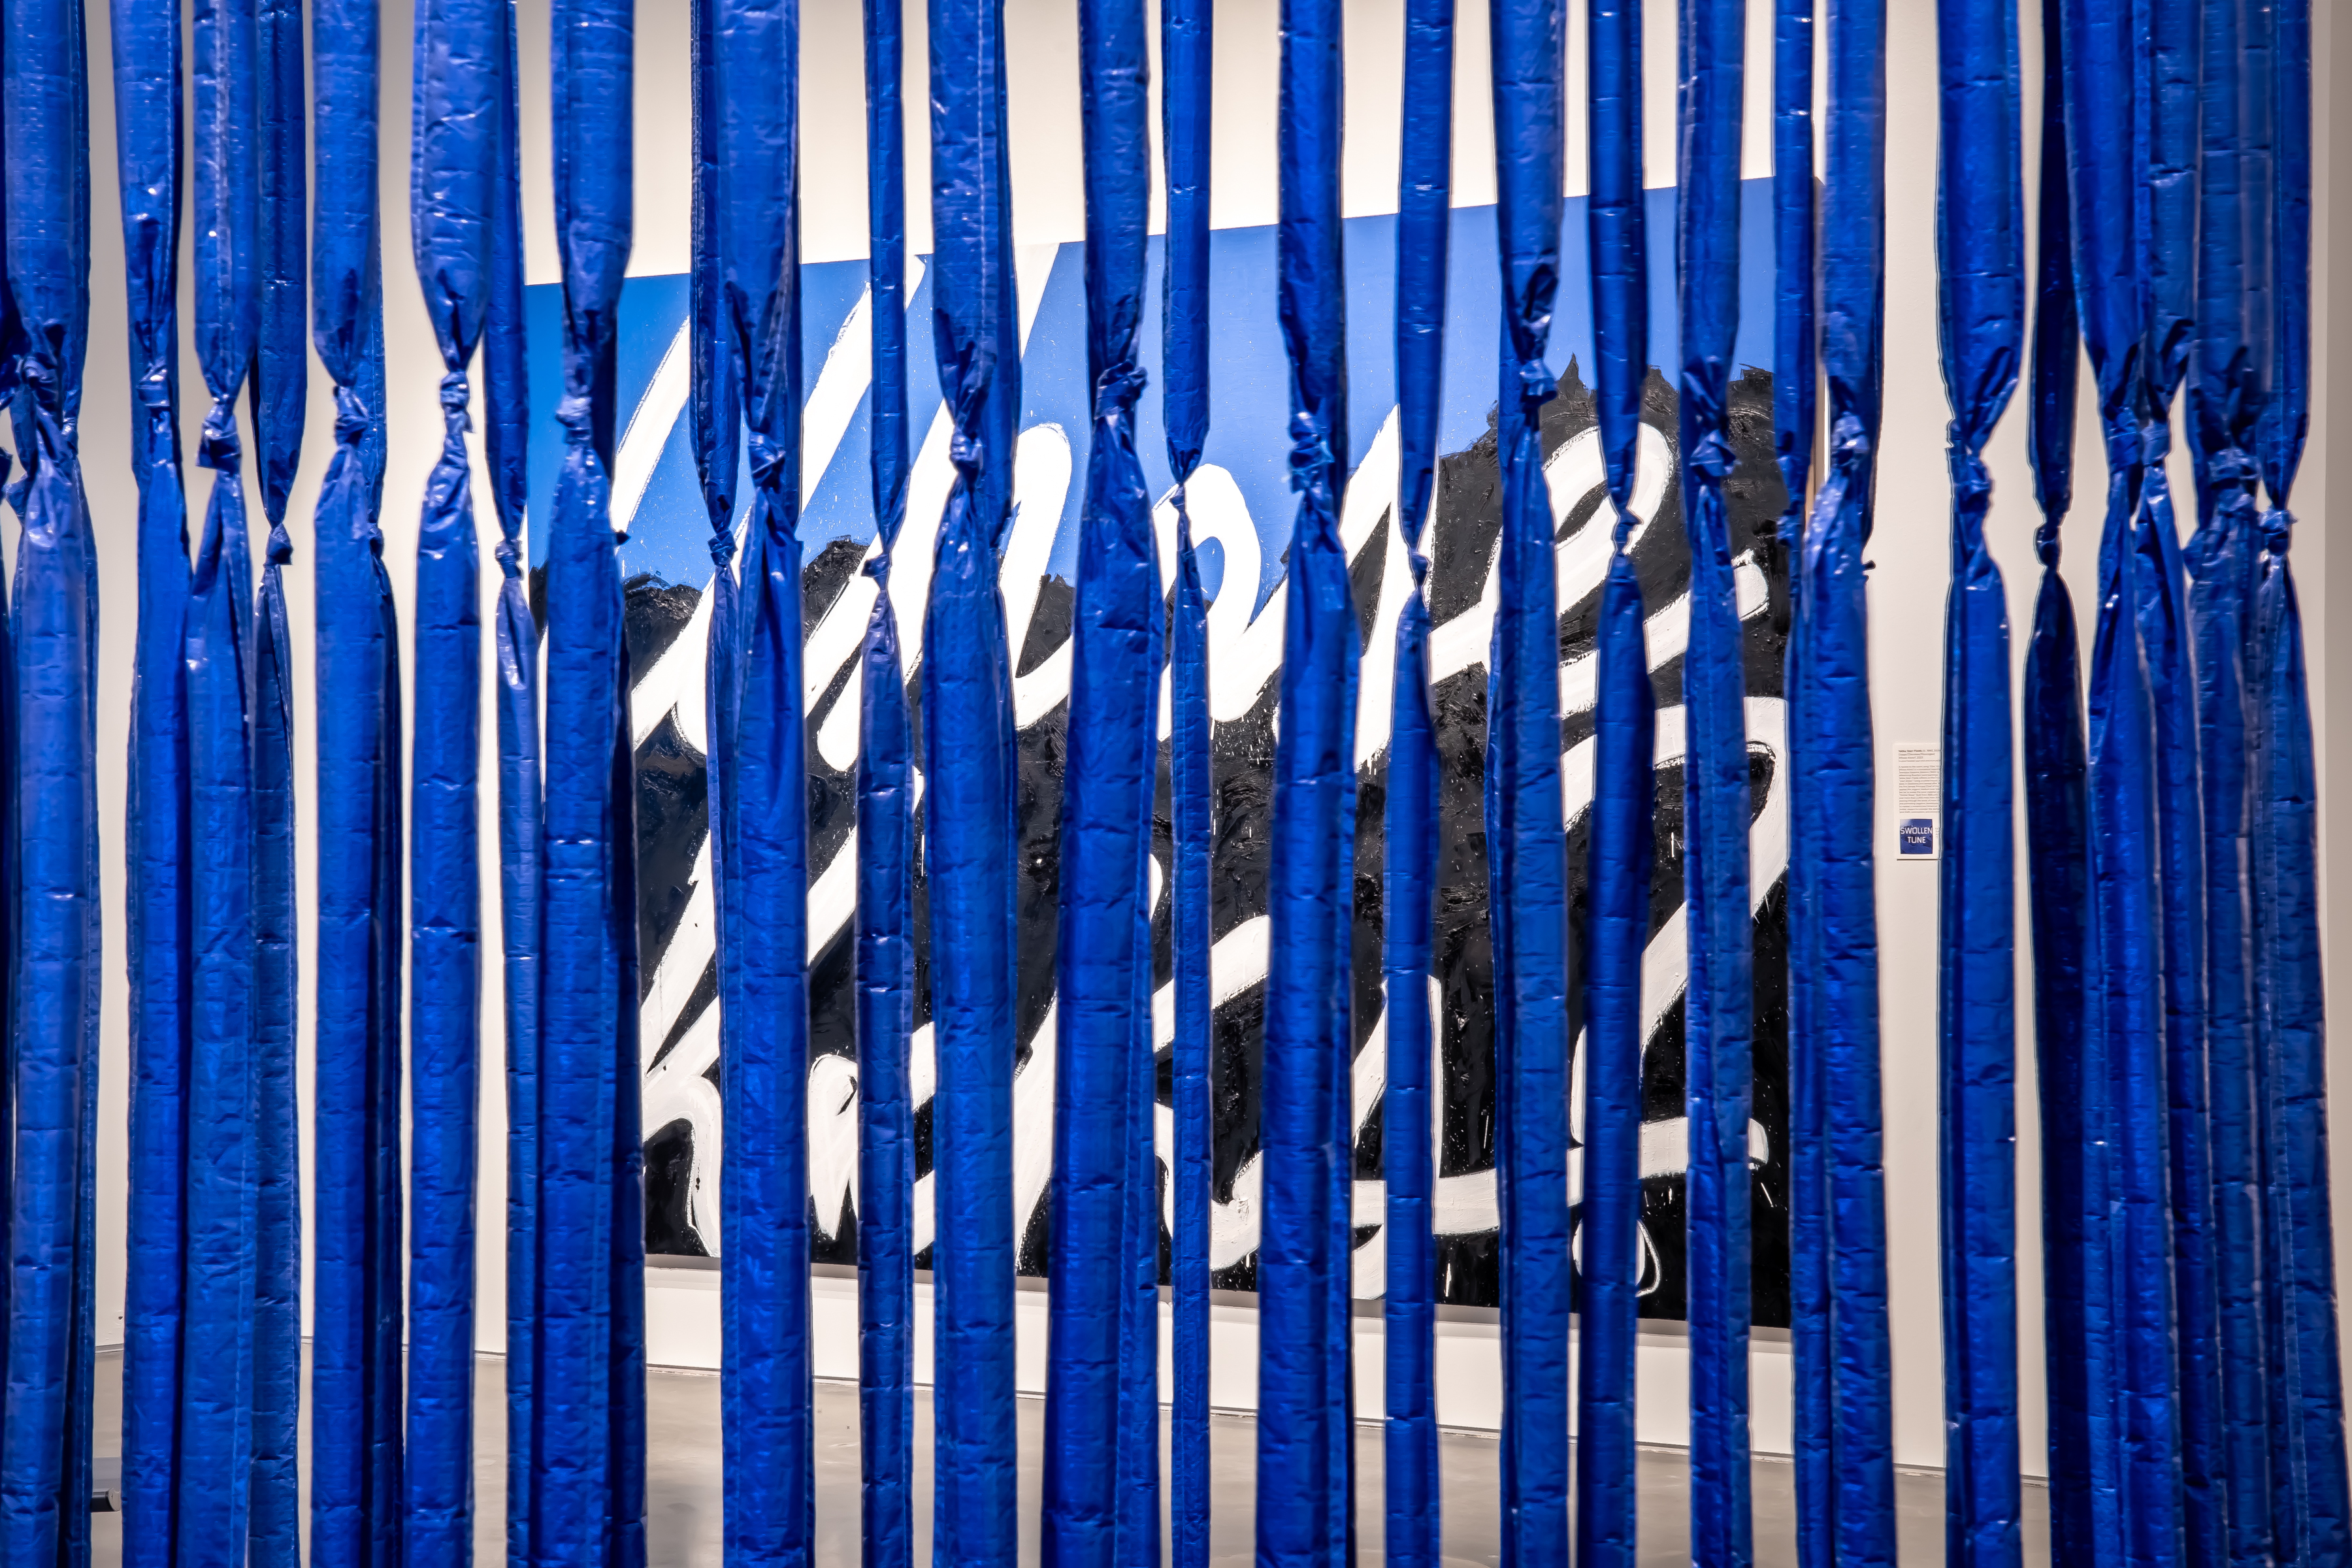 Strands of long blue tarp form rows in front of a blue and black painting with large white cursive writing in the center.